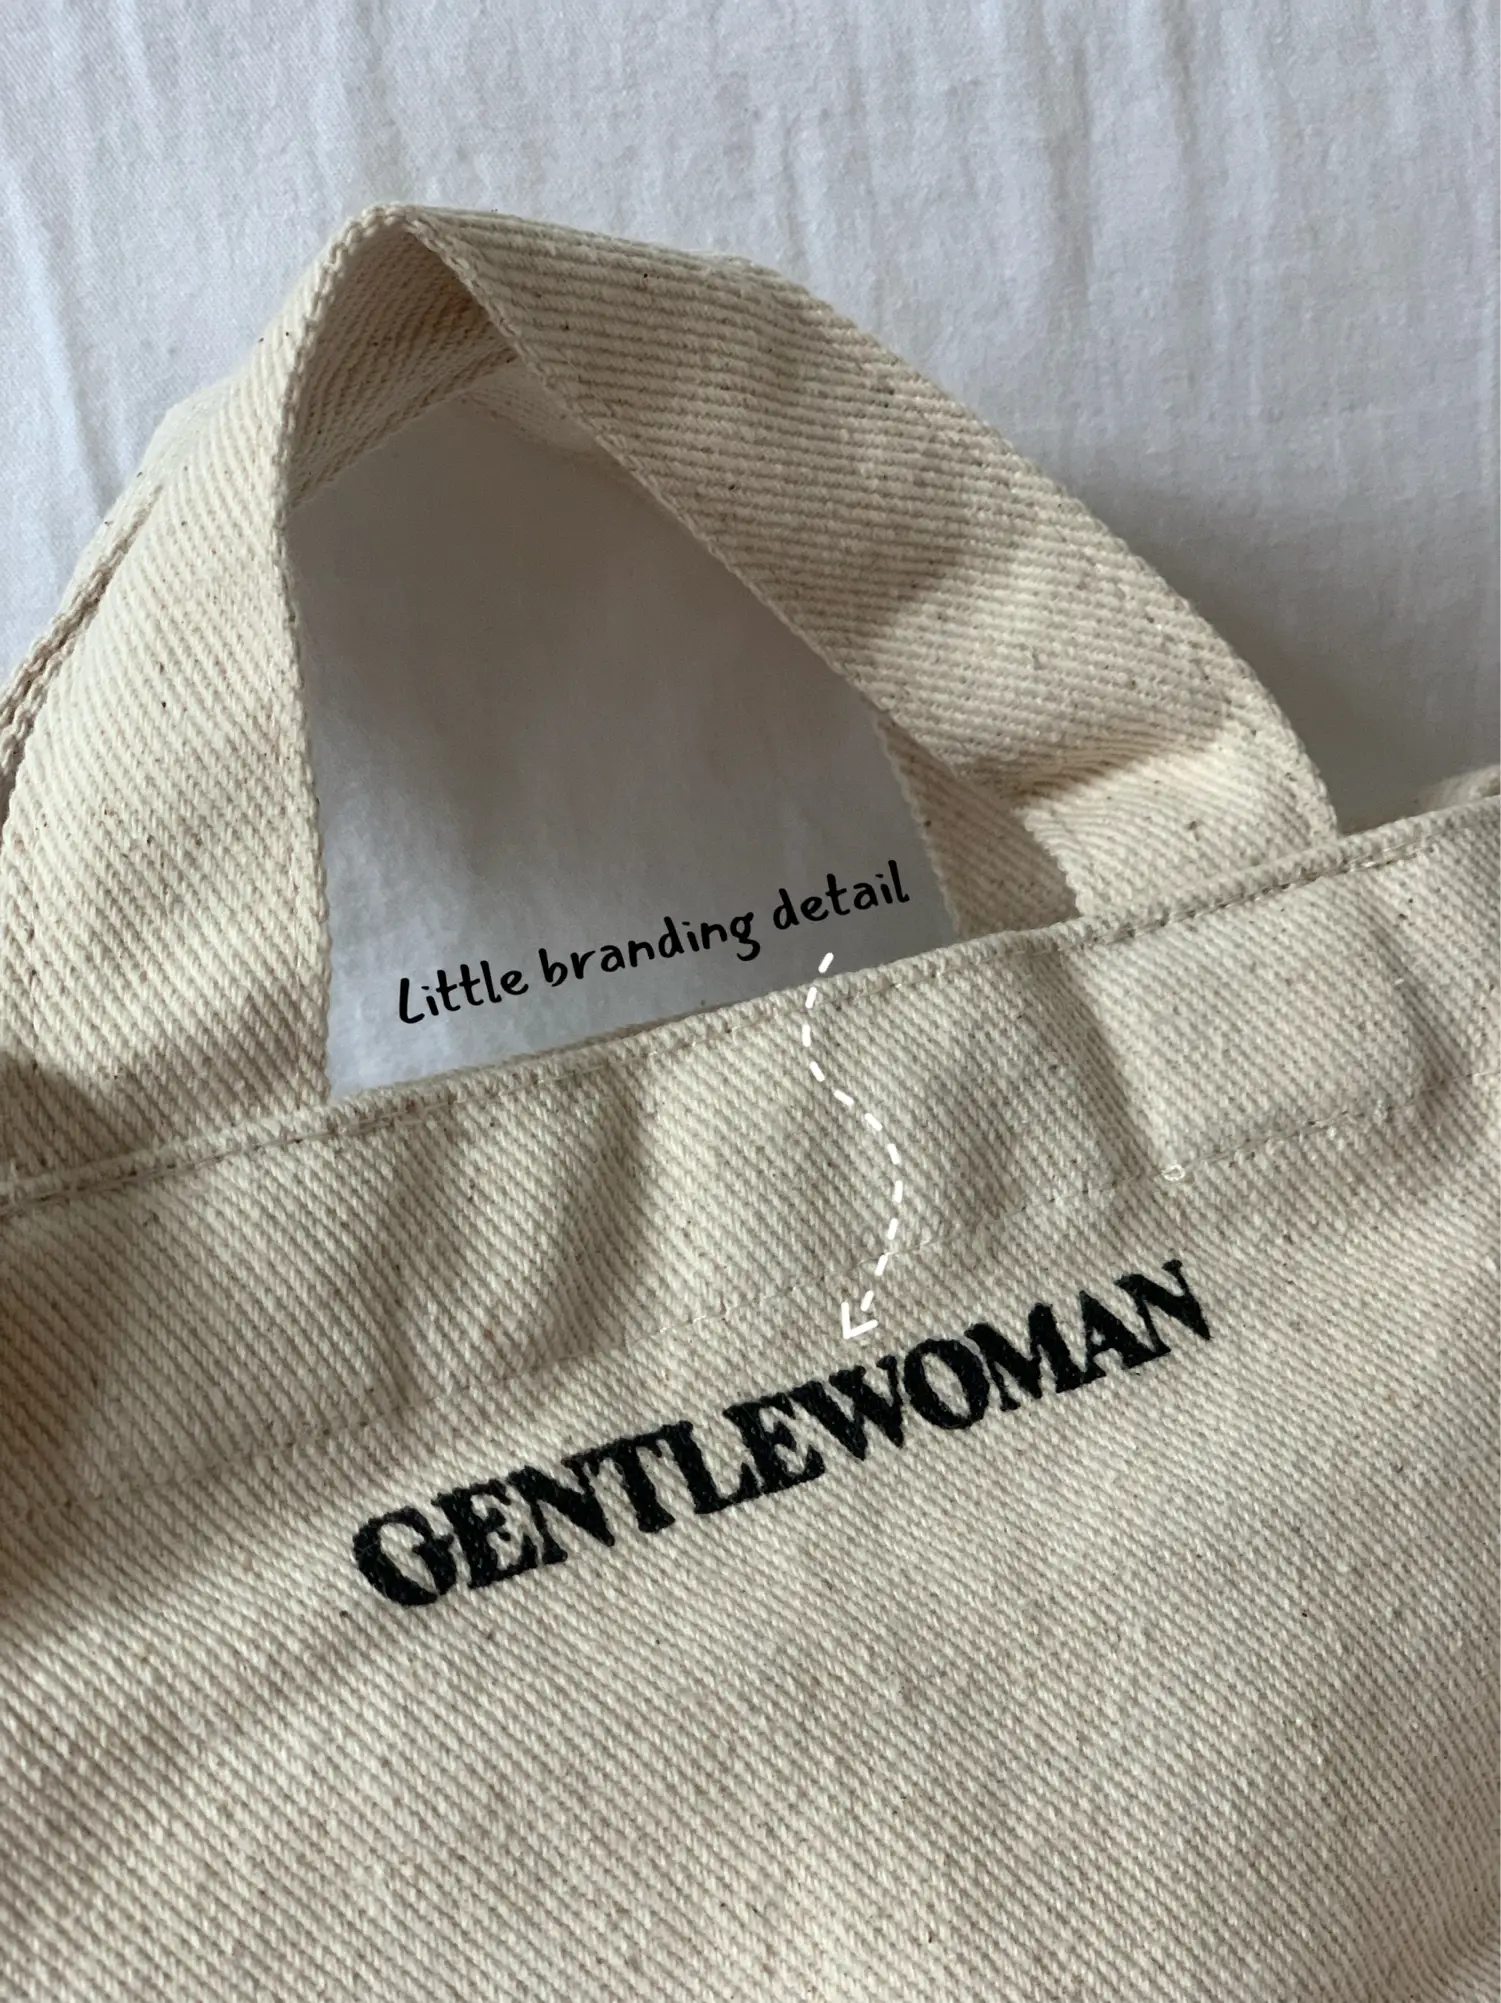 Gentle Woman Micro bag, is it worth it?! | Gallery posted by Felicia ...